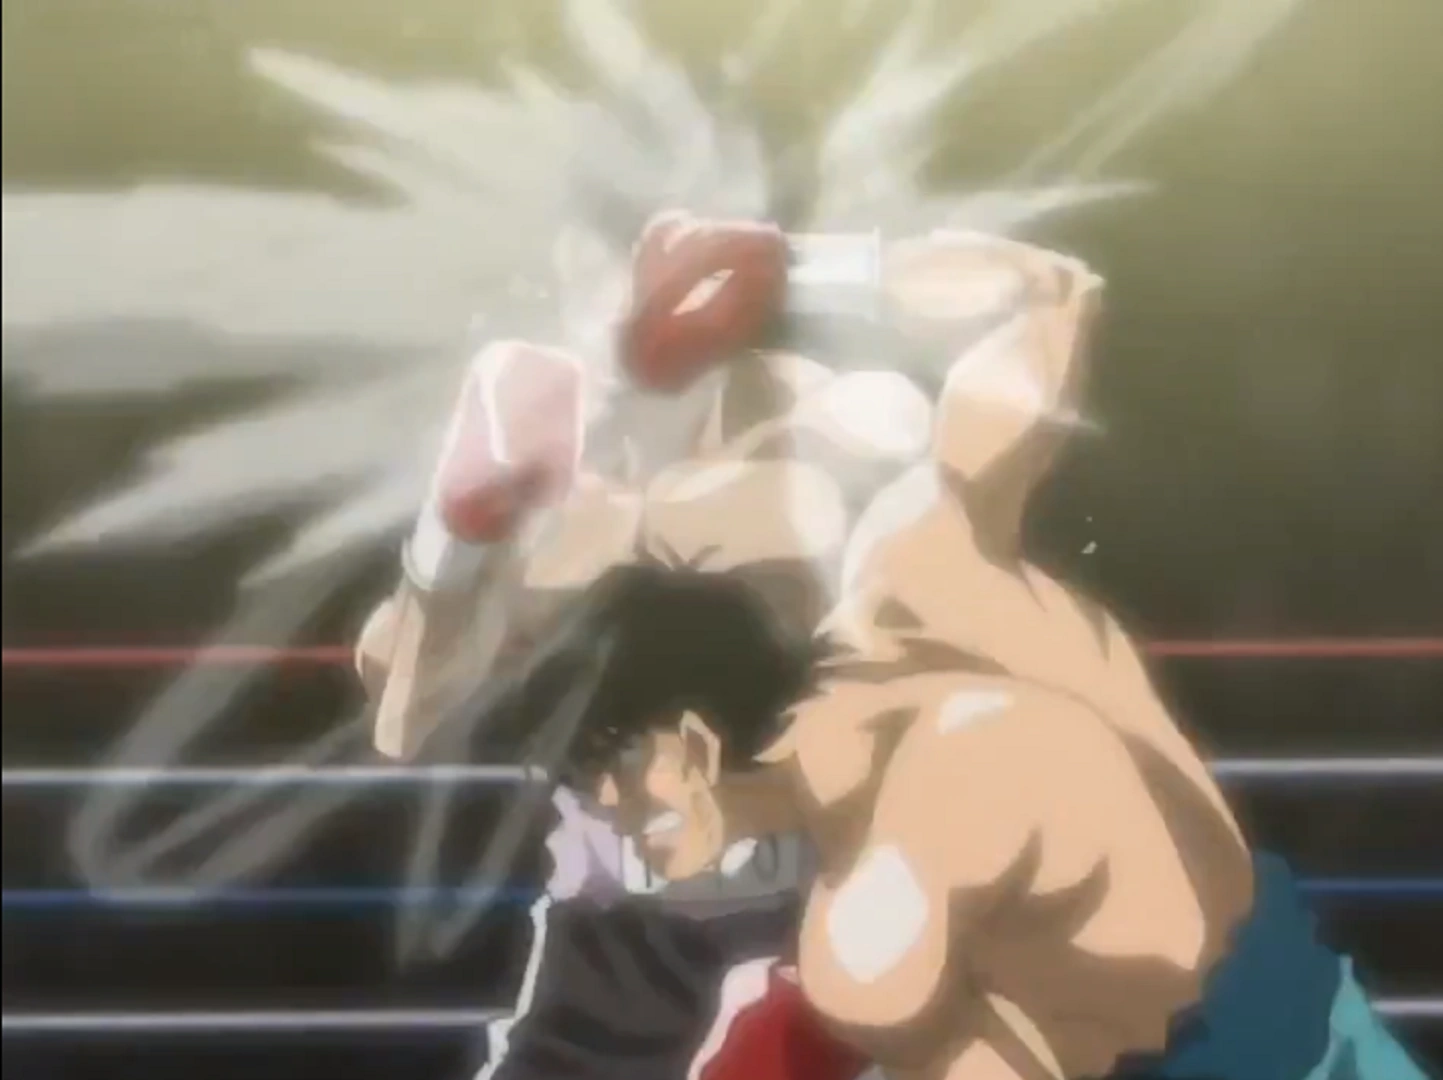 Ippo unleashed Dempsey Roll for the first time!